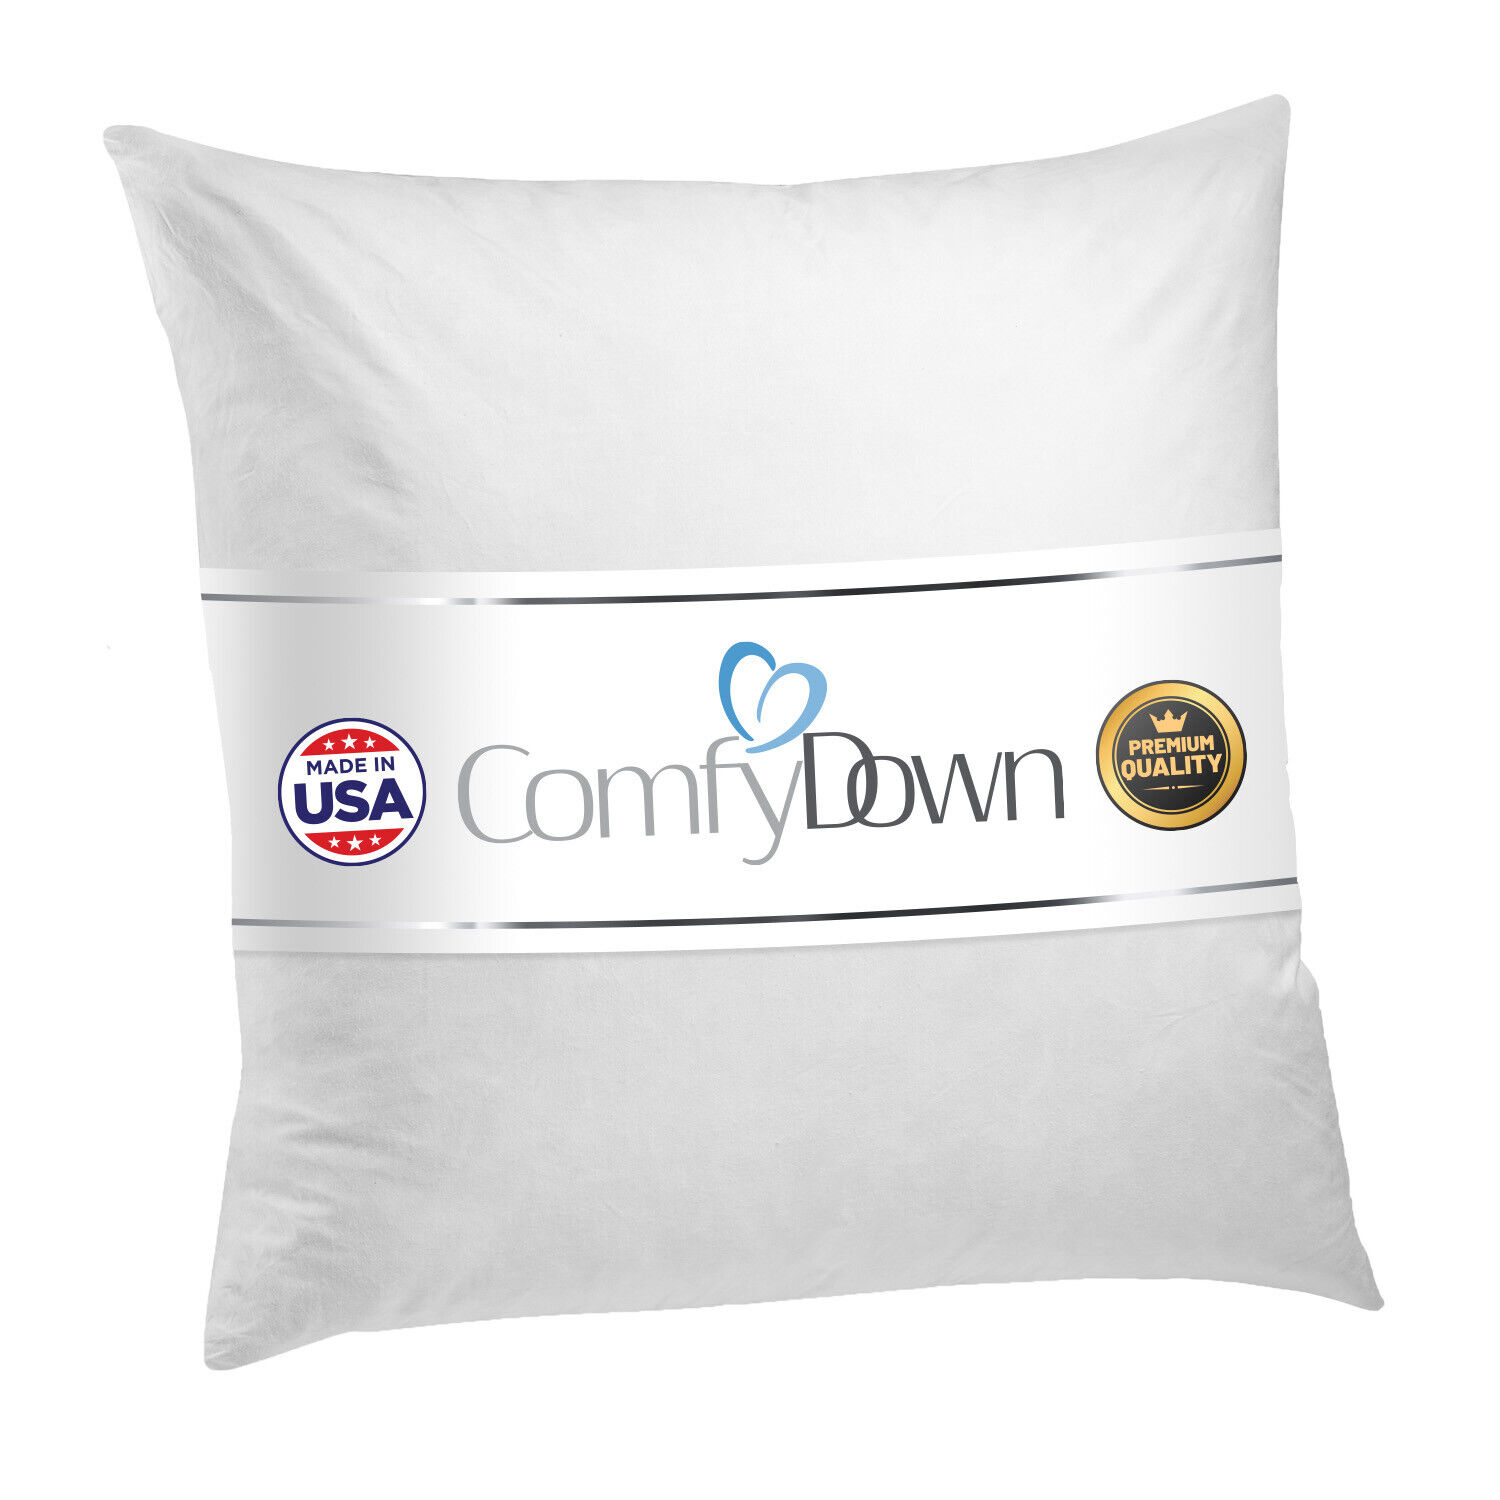 ComfyDown - Euro Square Pillow Insert FEATHER / DOWN  Sham Stuffer - ALL SIZES